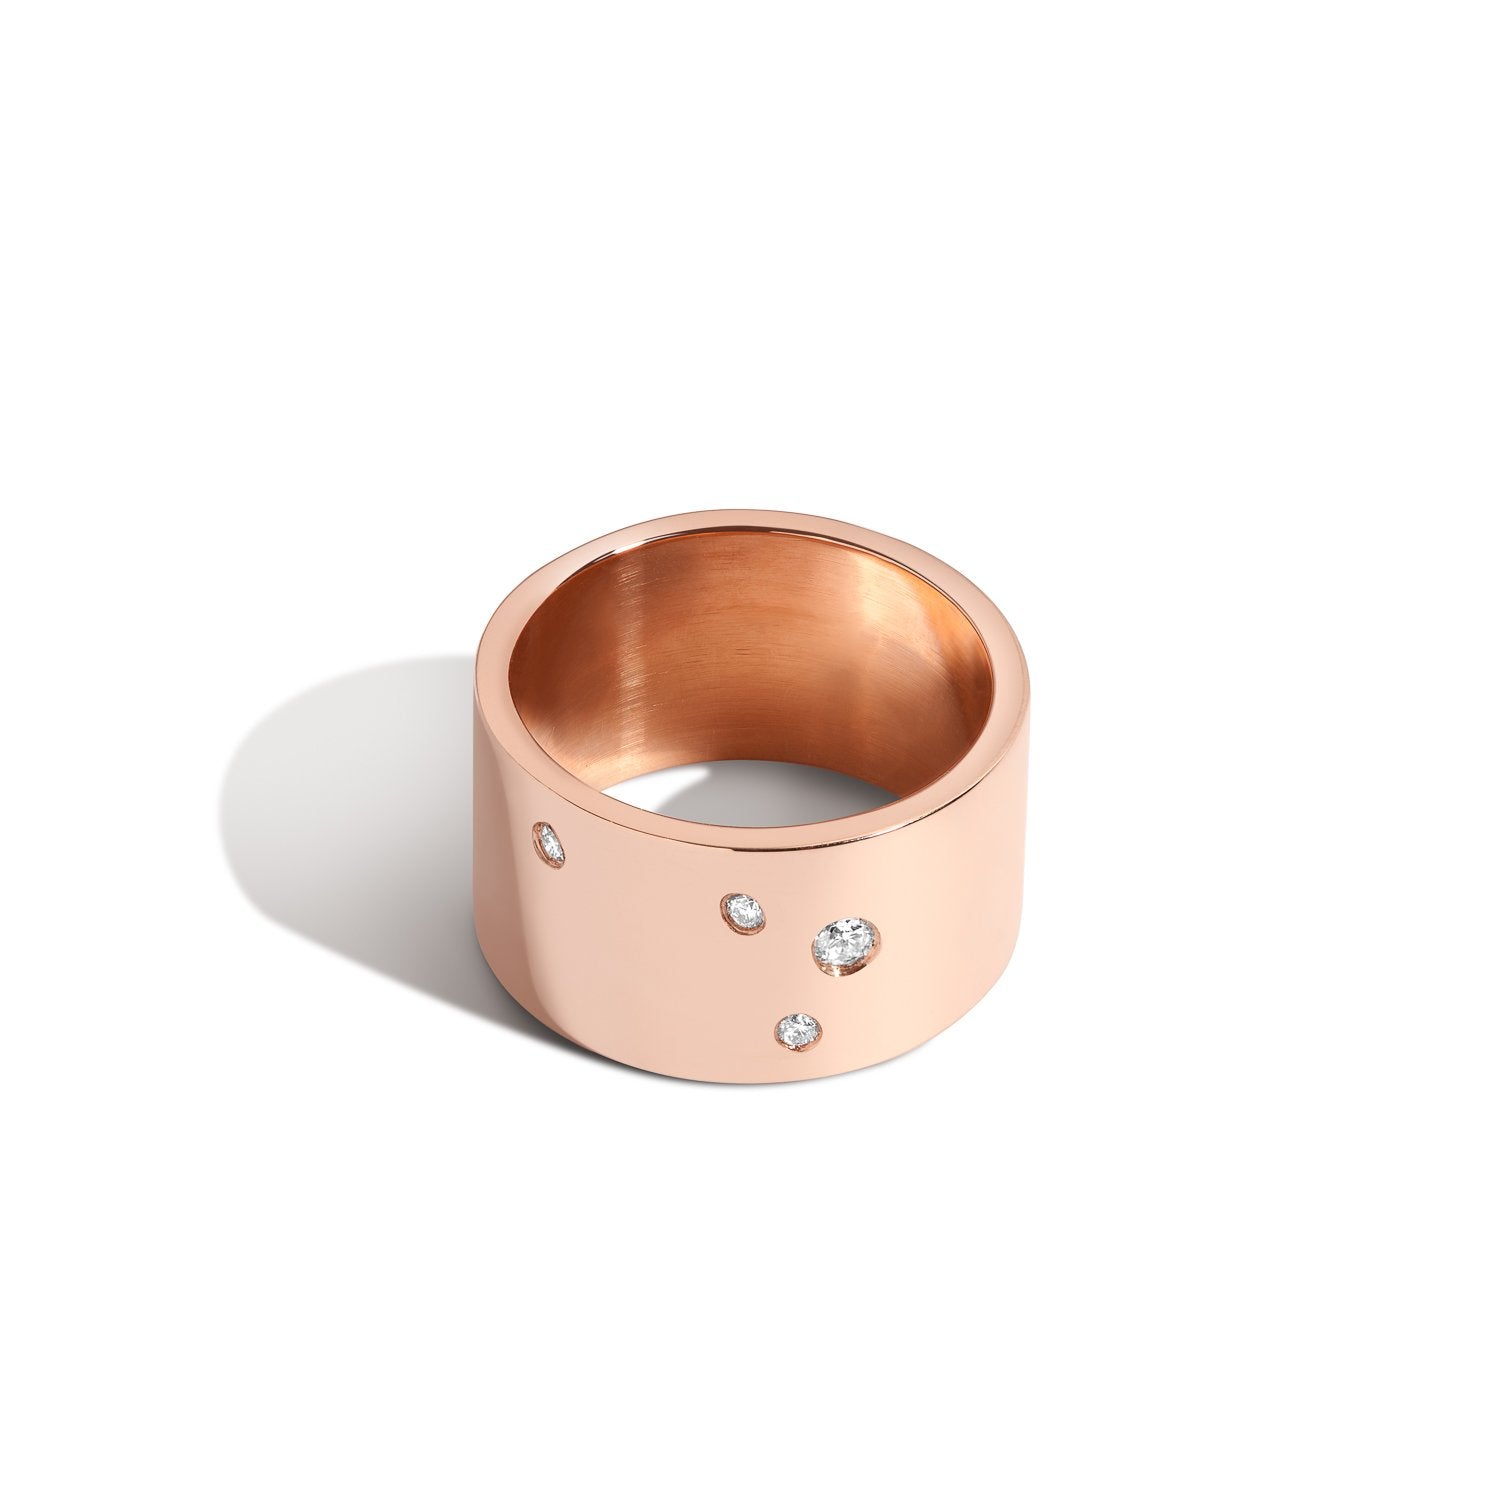 Shahla Karimi Jewelry Zodiac Reveal Ring Collection with White Diamonds - Cancer - 14K Rose Gold - Front View